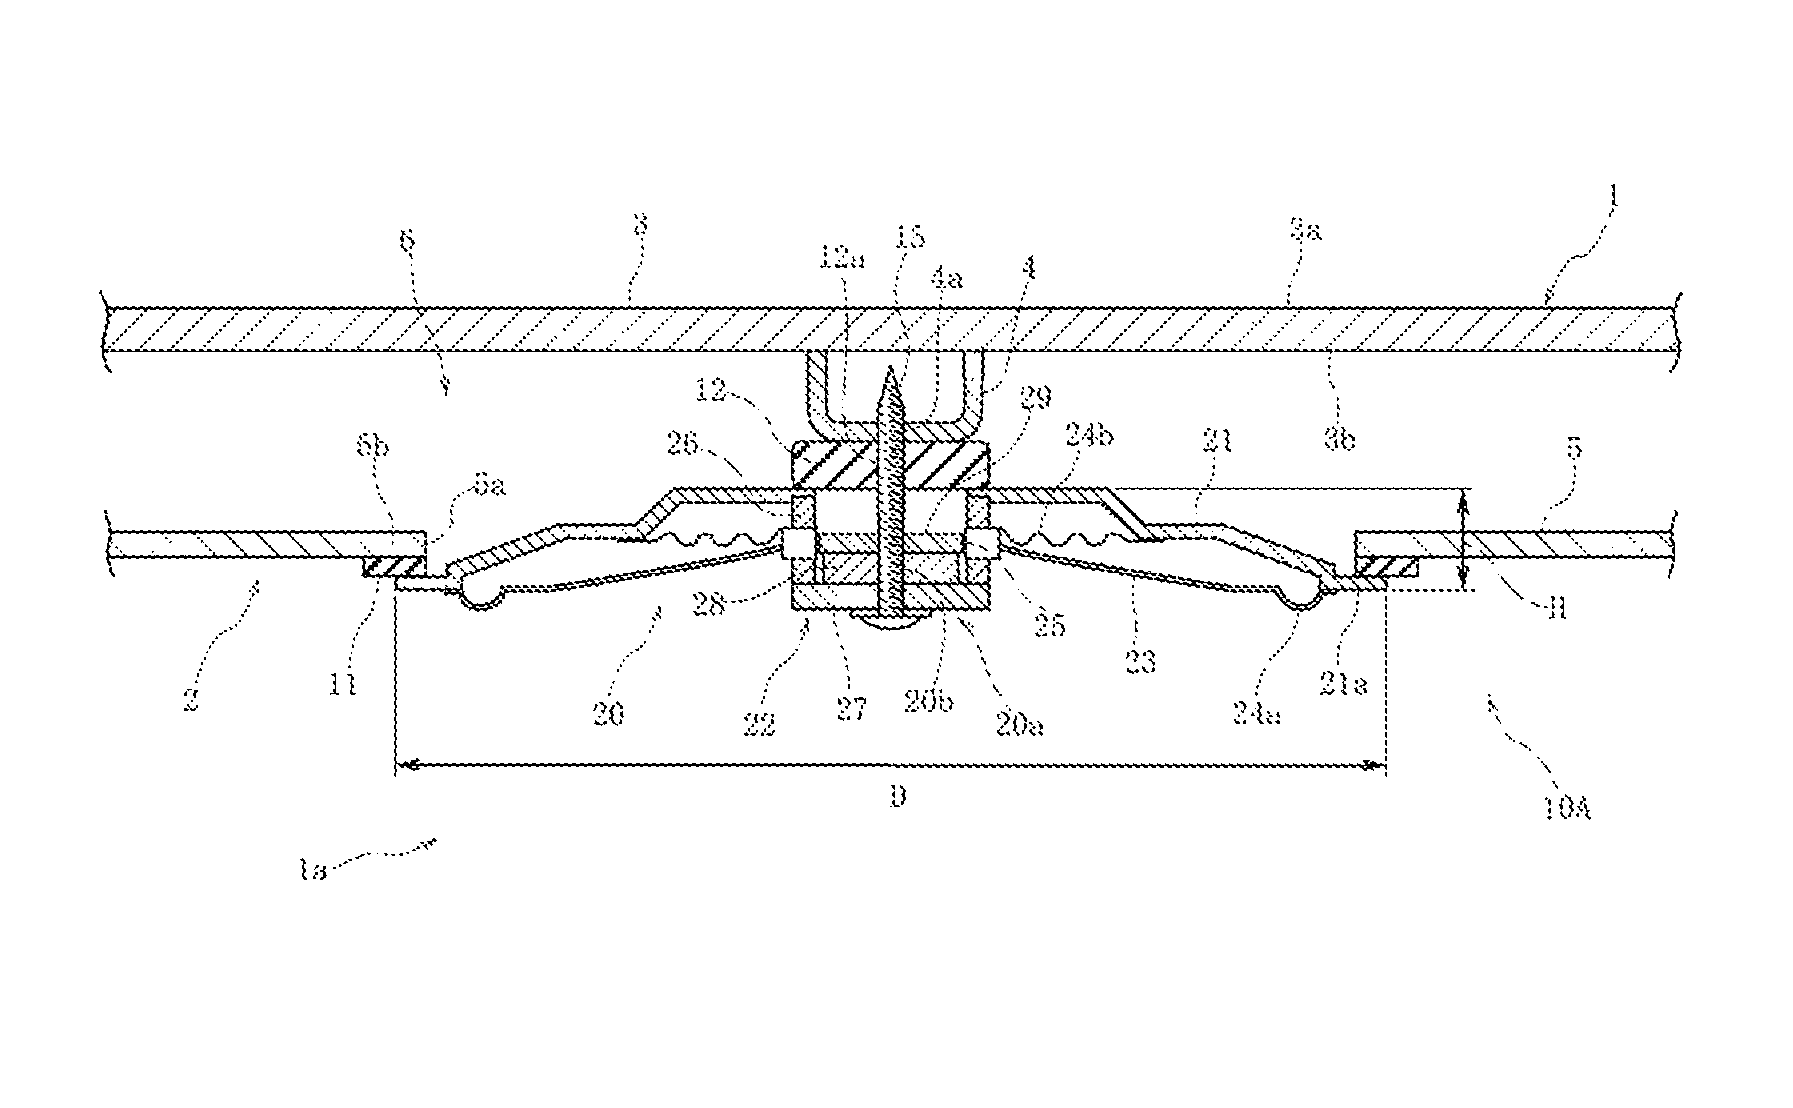 On-vehicle acoustic device and method of assembling the same